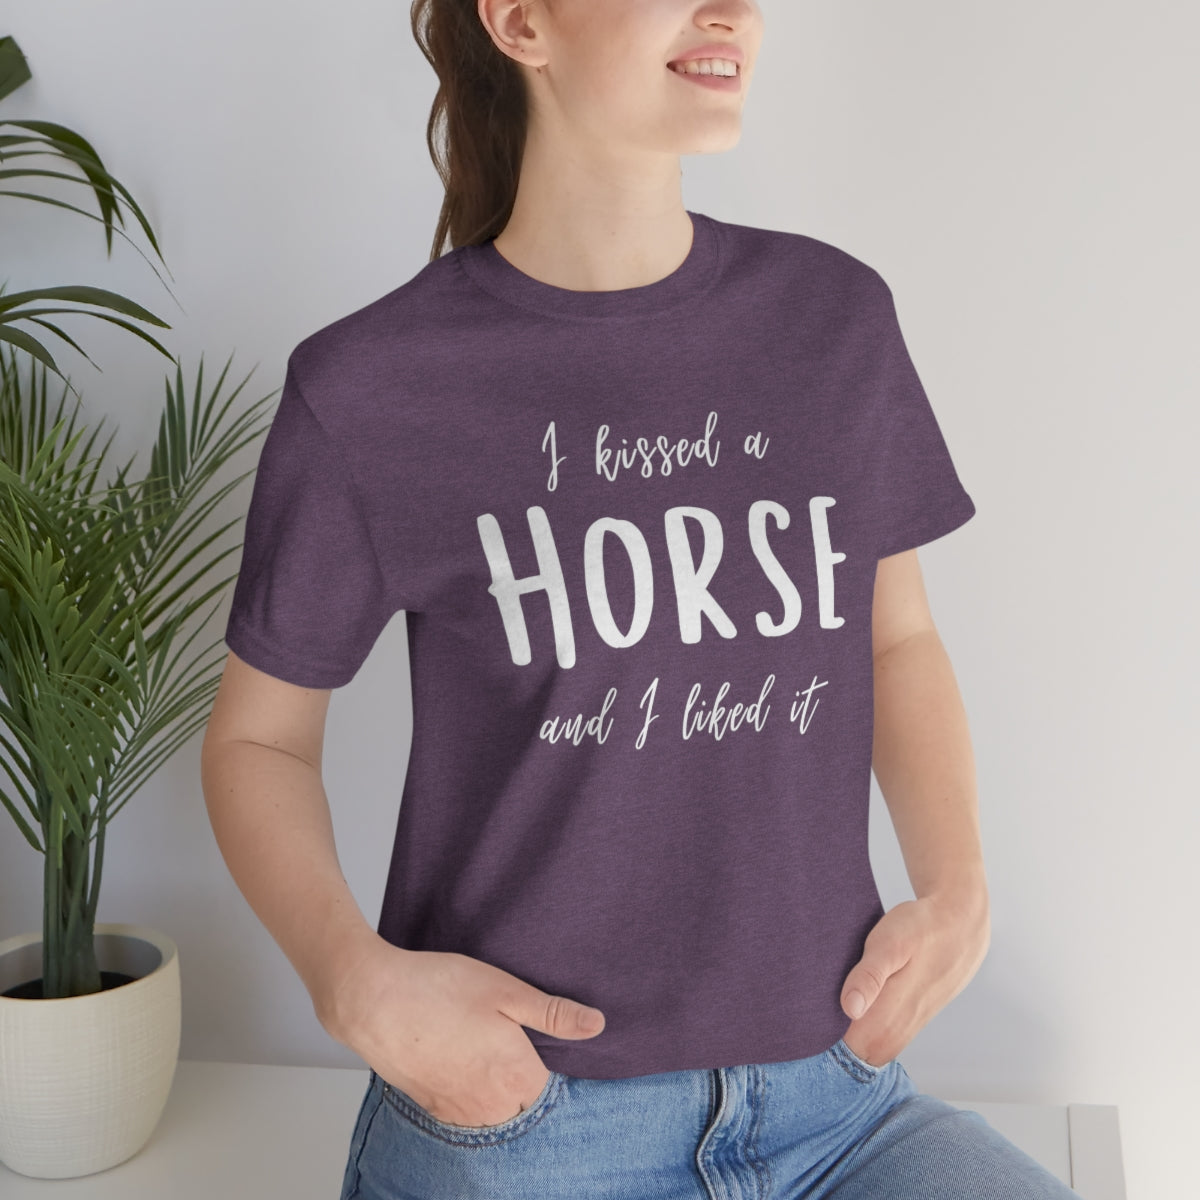 I Kissed a Horse